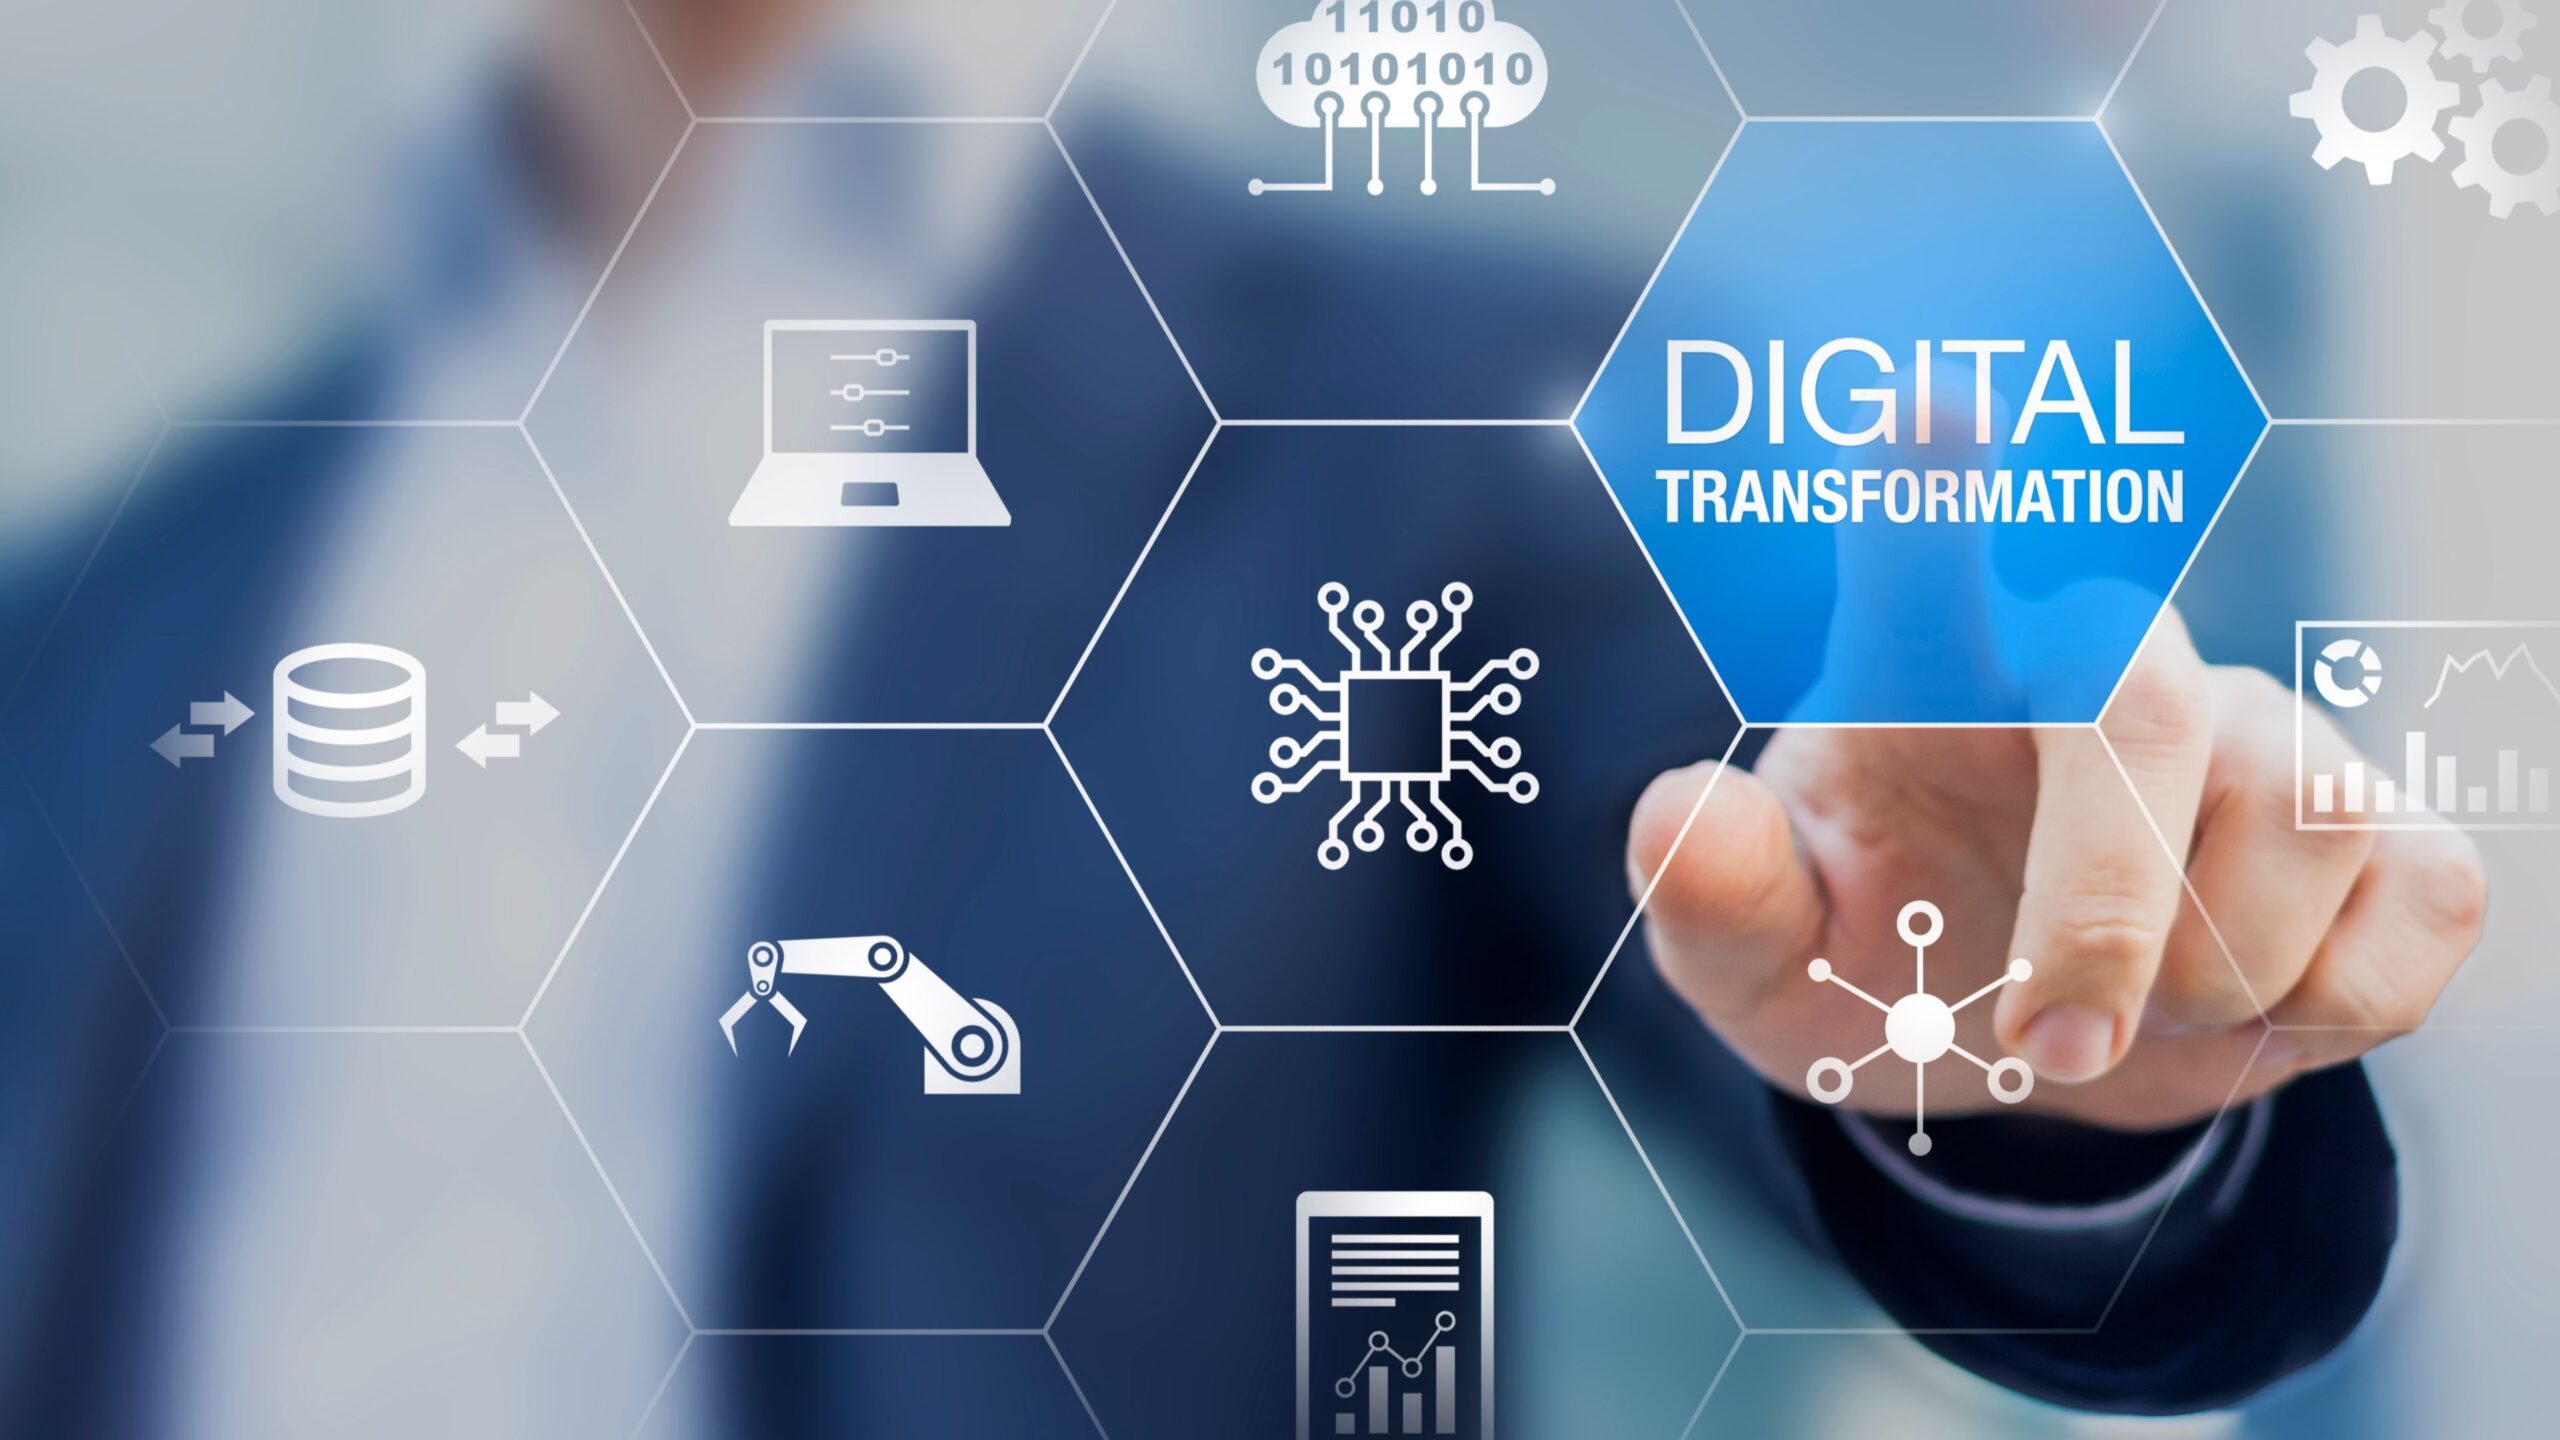 How ERP can help with Digital Transformation